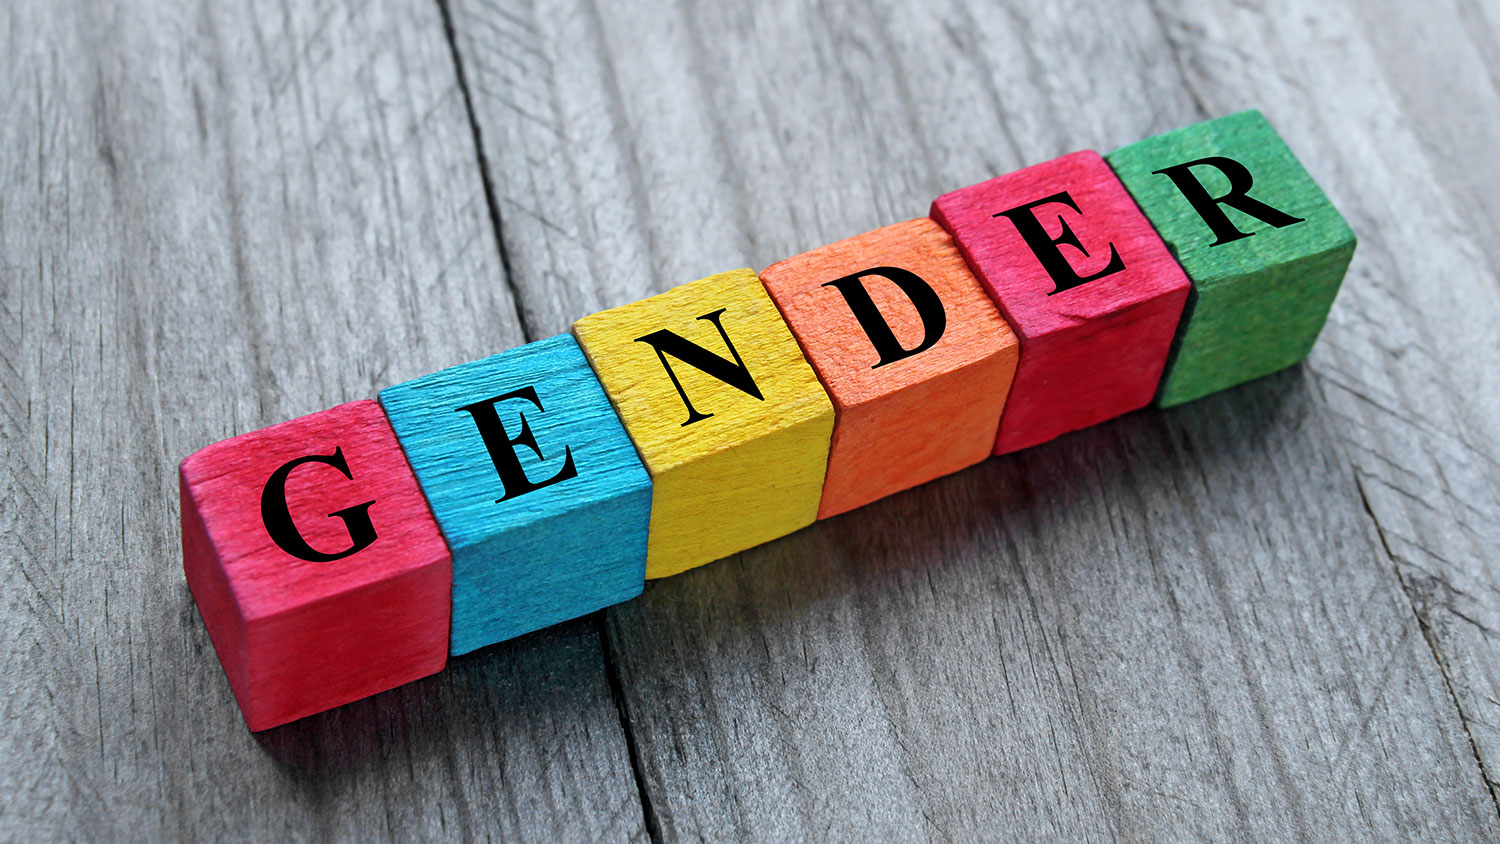 Brightly colored blocks spelling out the word "gender"